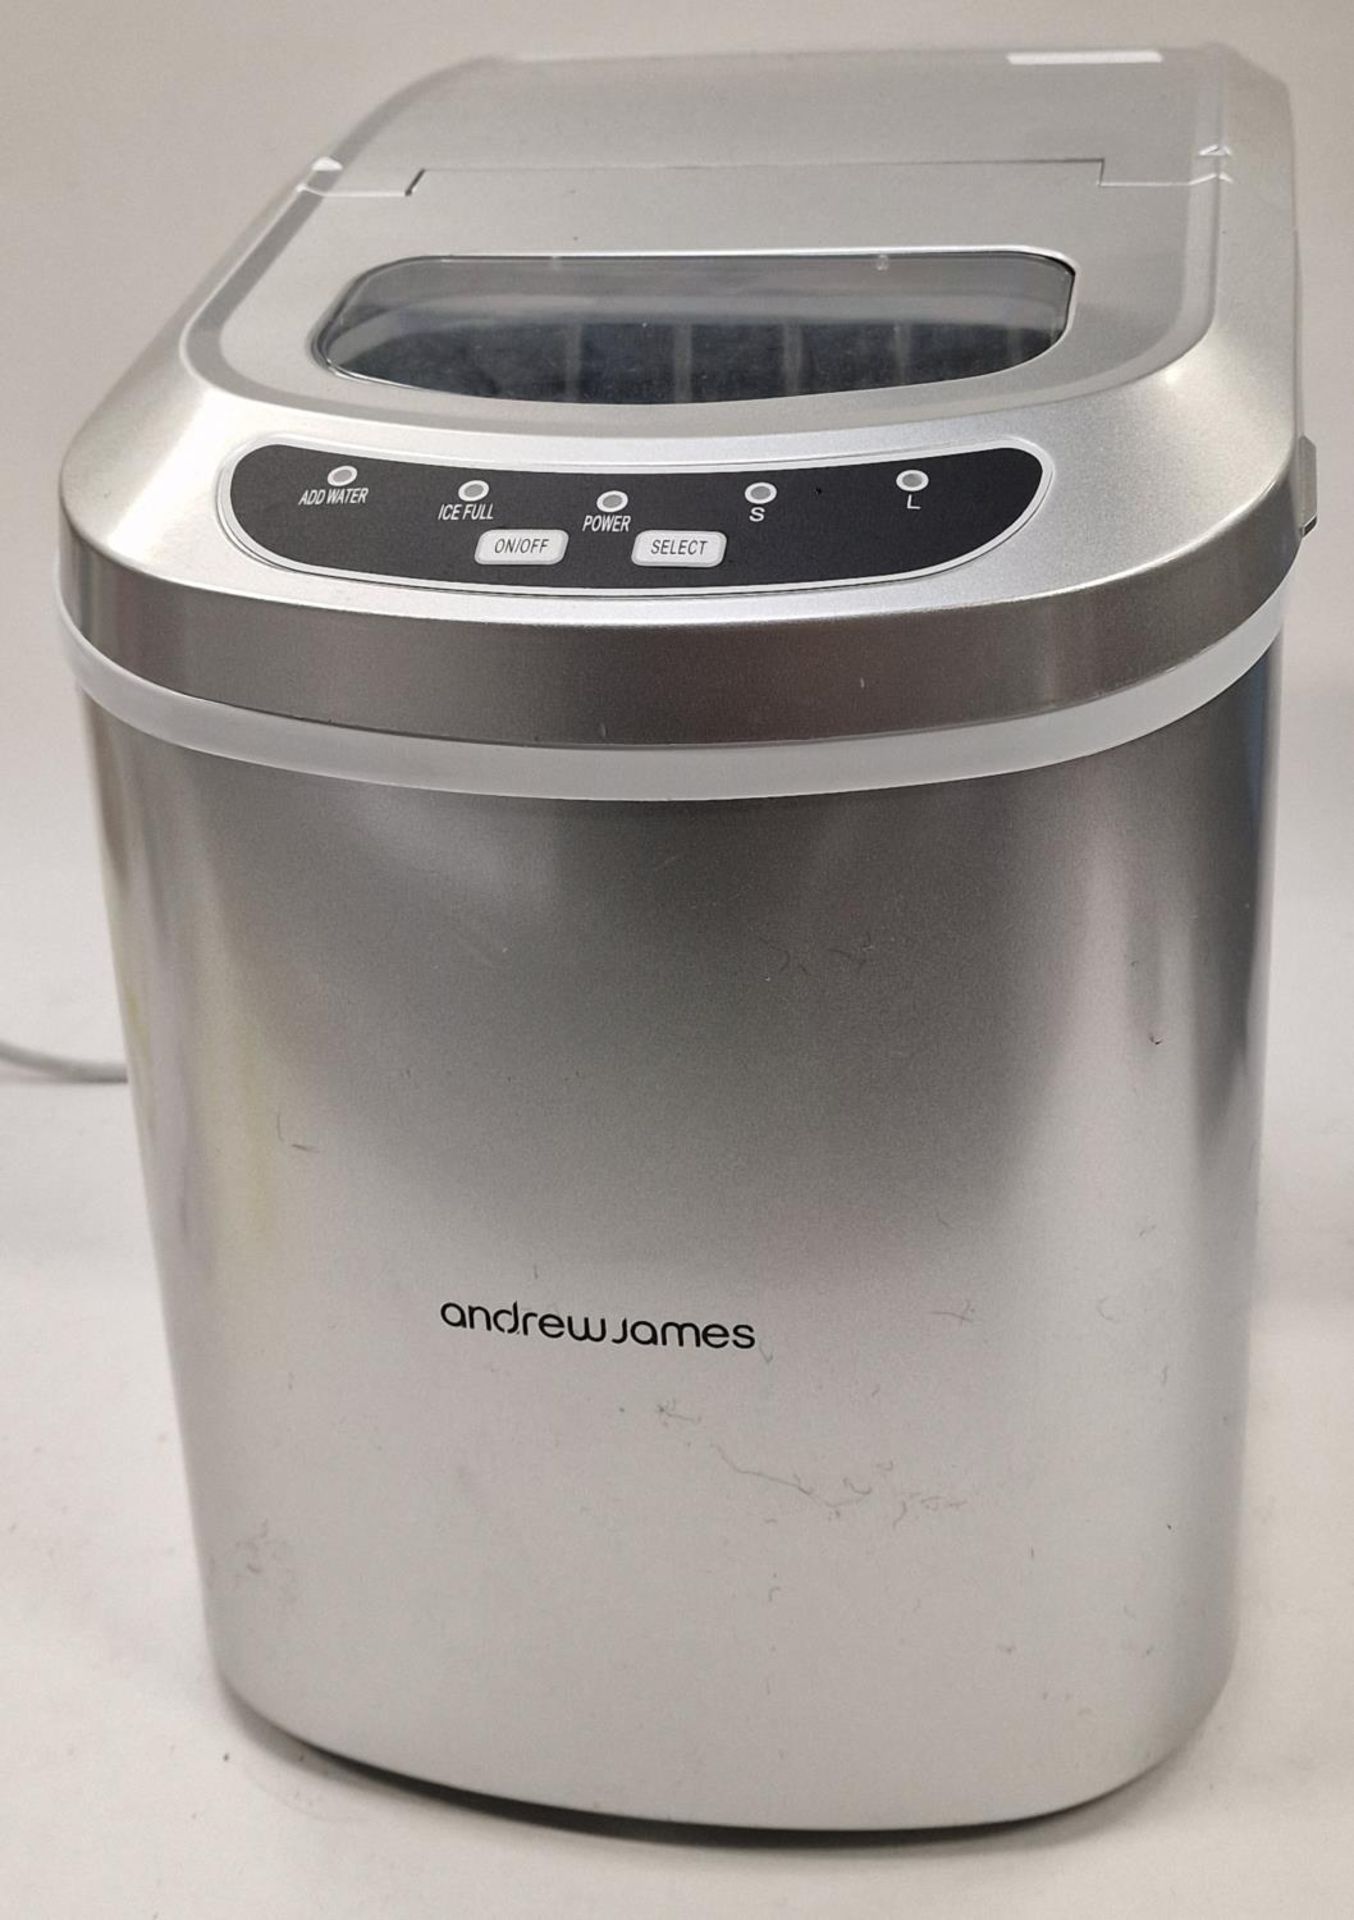 An Andrew James electric ice machine.